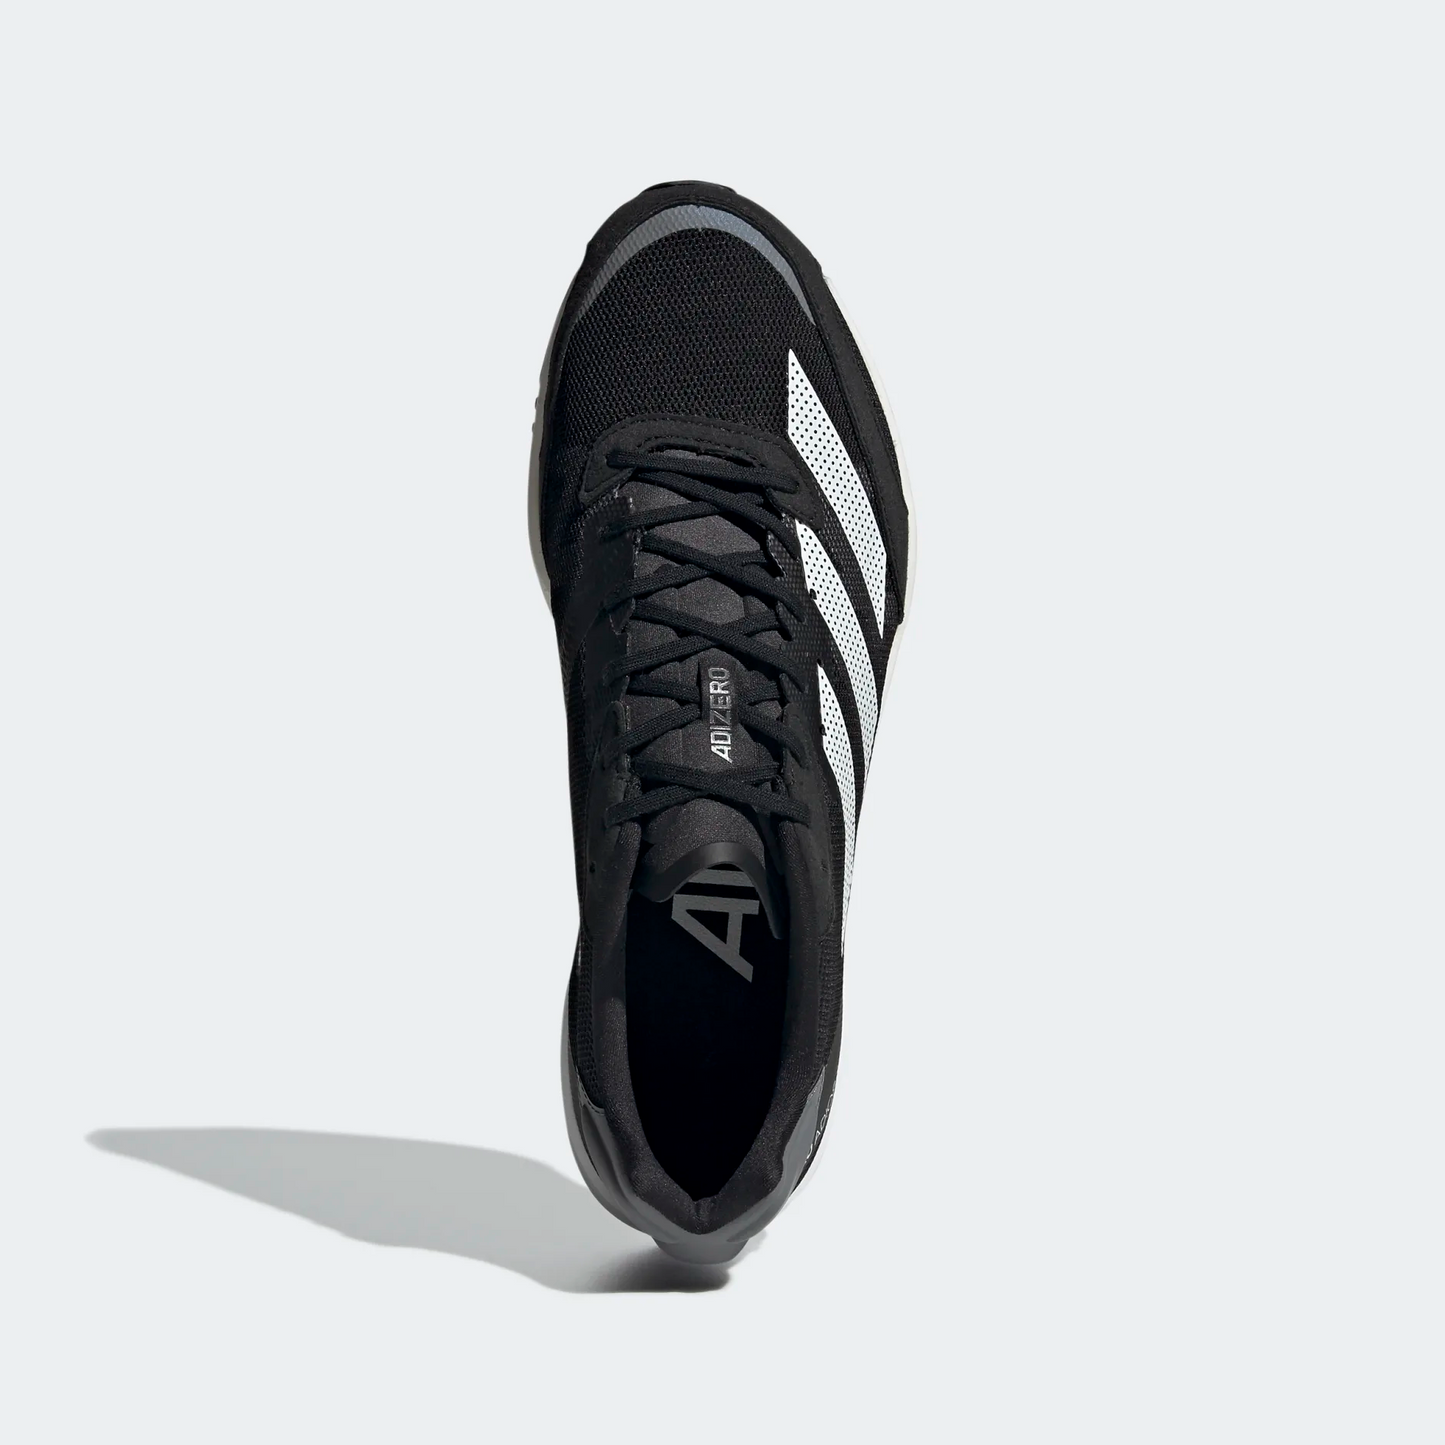 ADIZERO ADIOS PRO 2.0 SHOES RUNNING First Copy Shoes (Black)